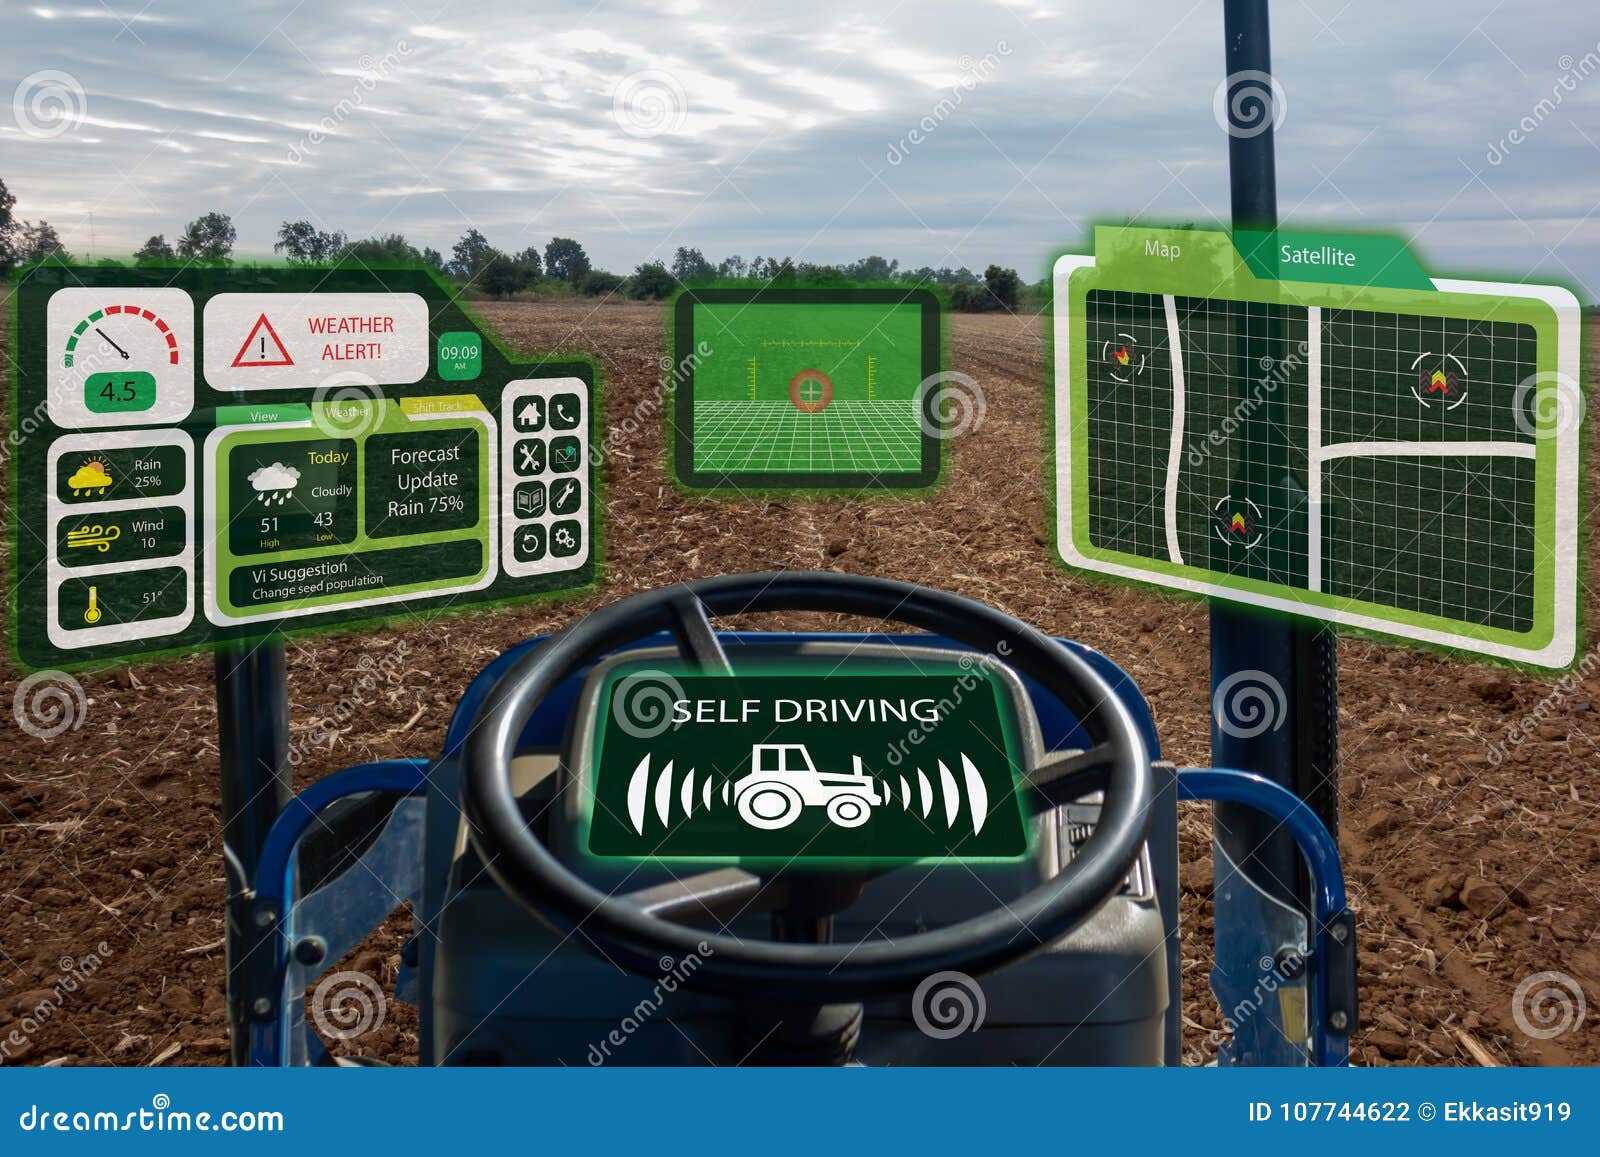 iot smart industry robot 4.0 agriculture concept,industrial agronomist,farmer using autonomous tractor with self driving technolog